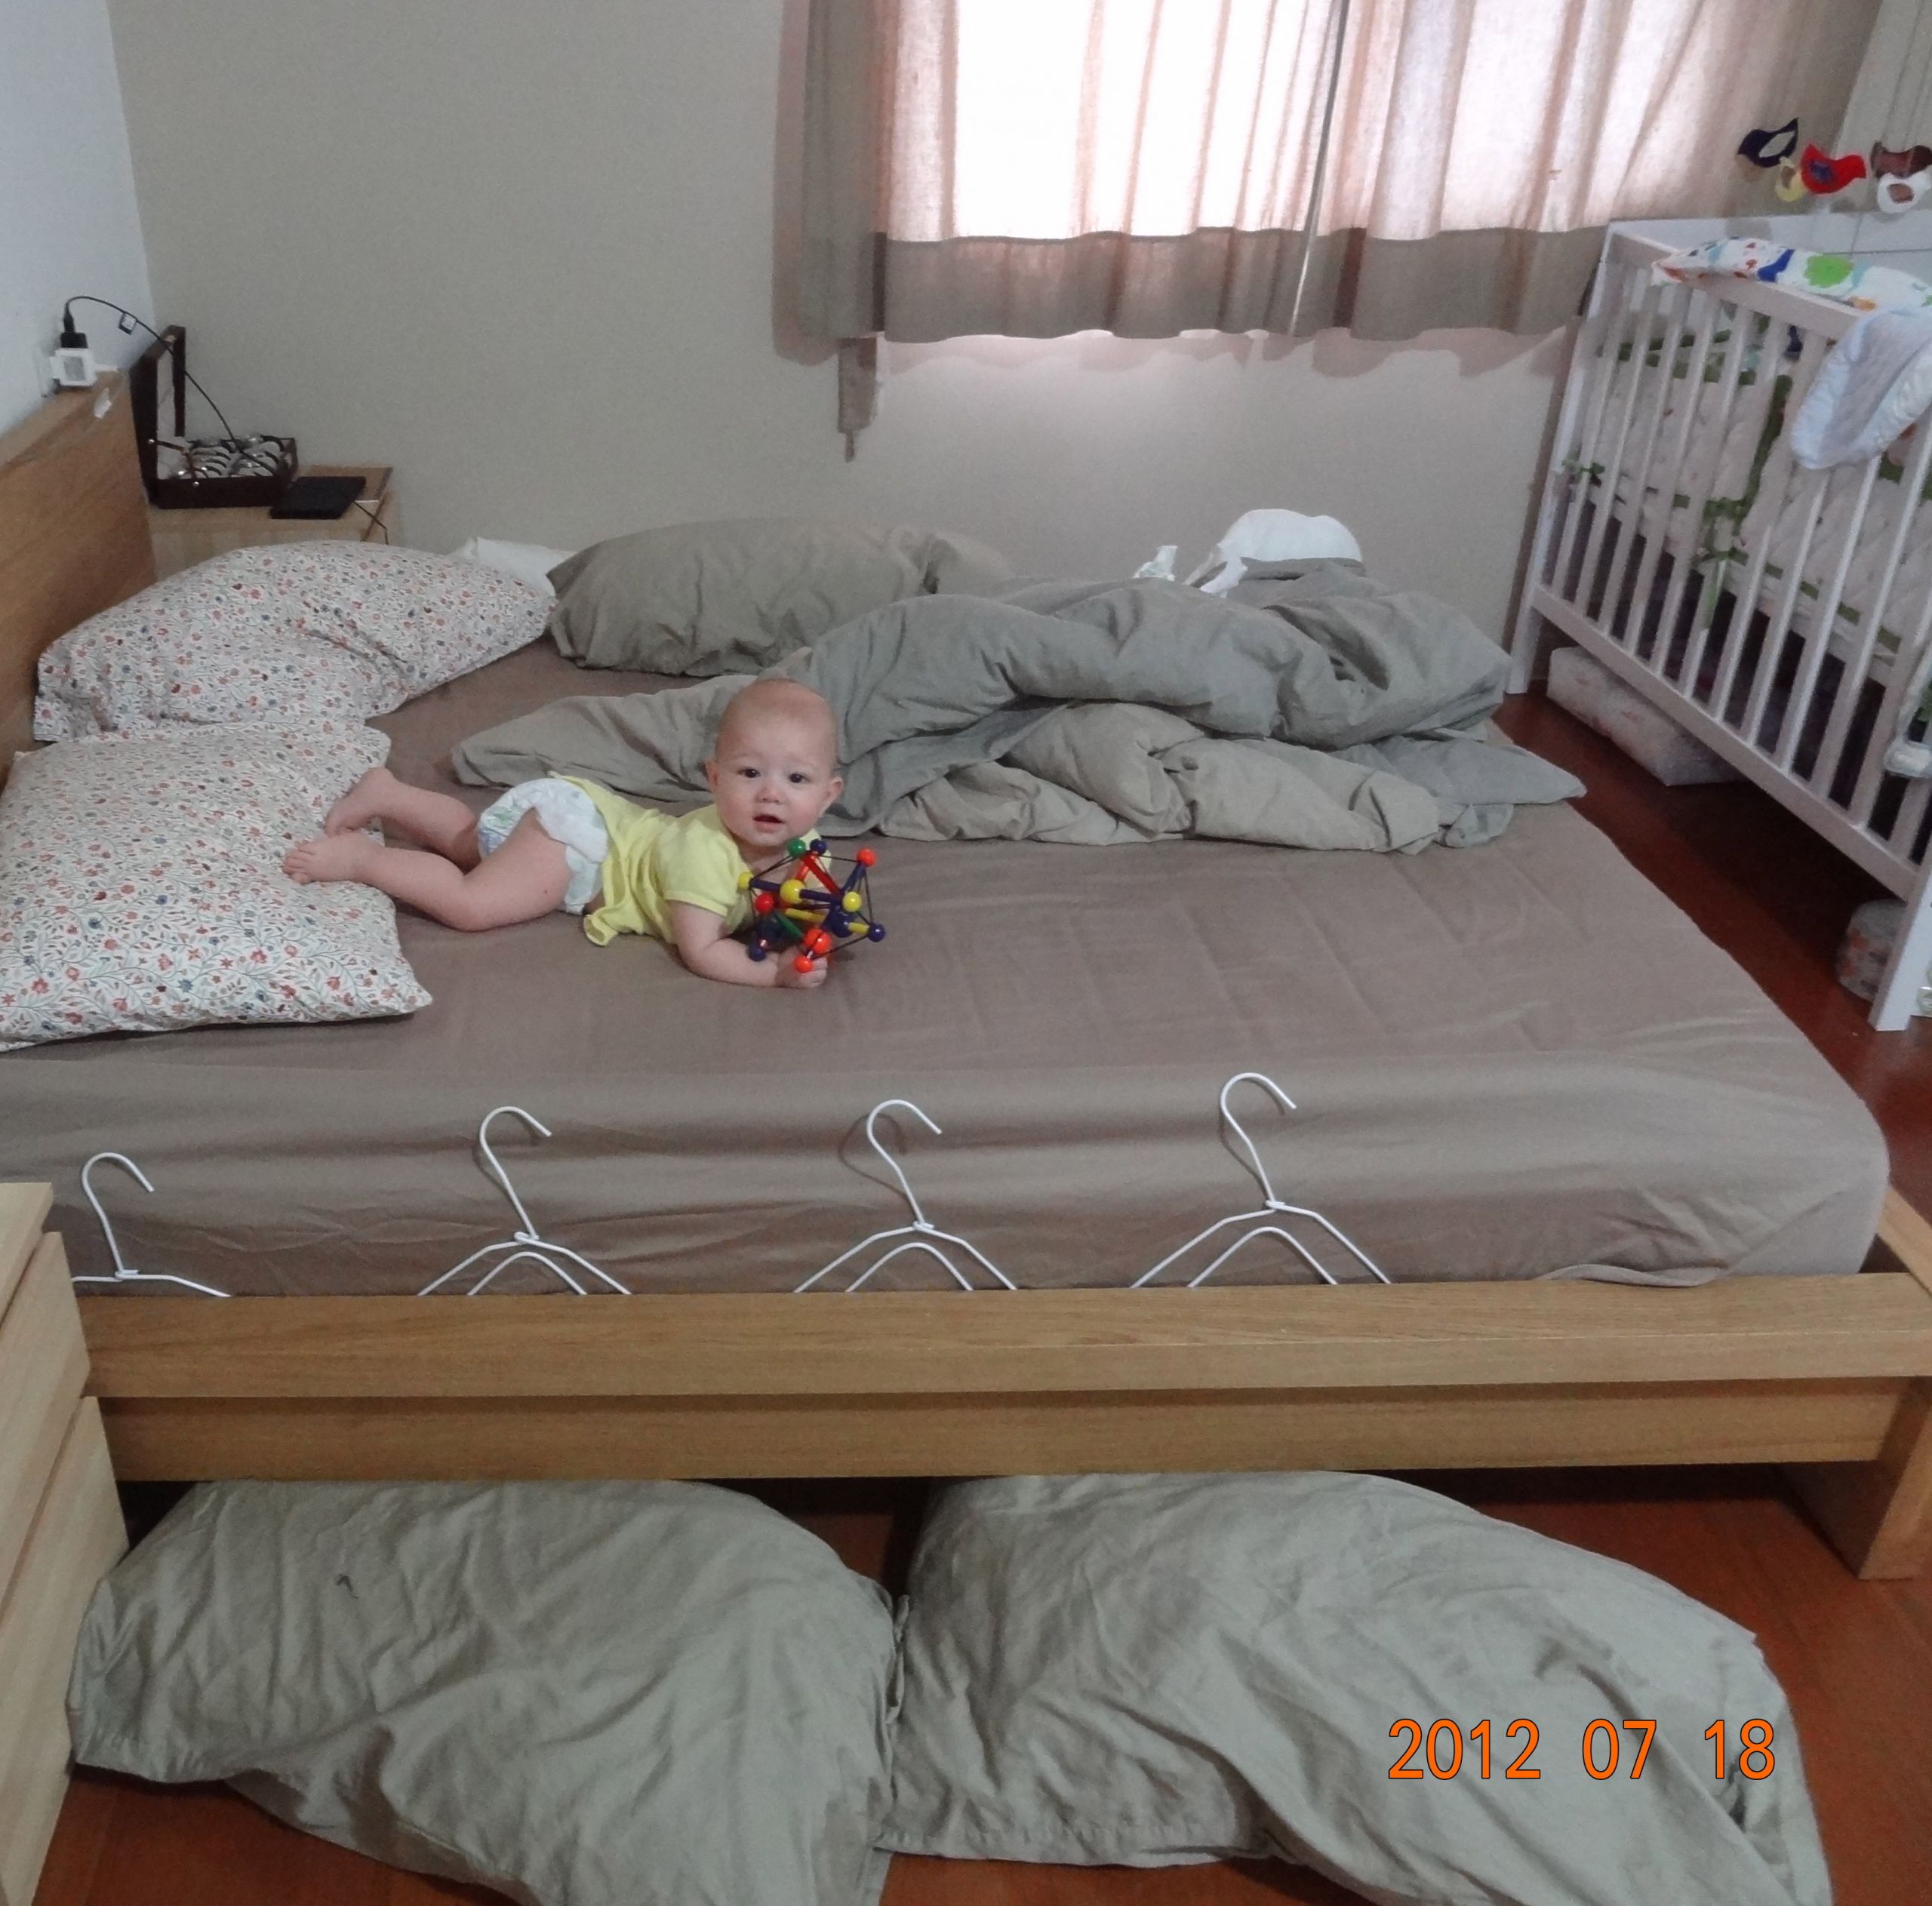 Toddler Bed Rails DIY
 DIY baby Bedrail with swimming noodle